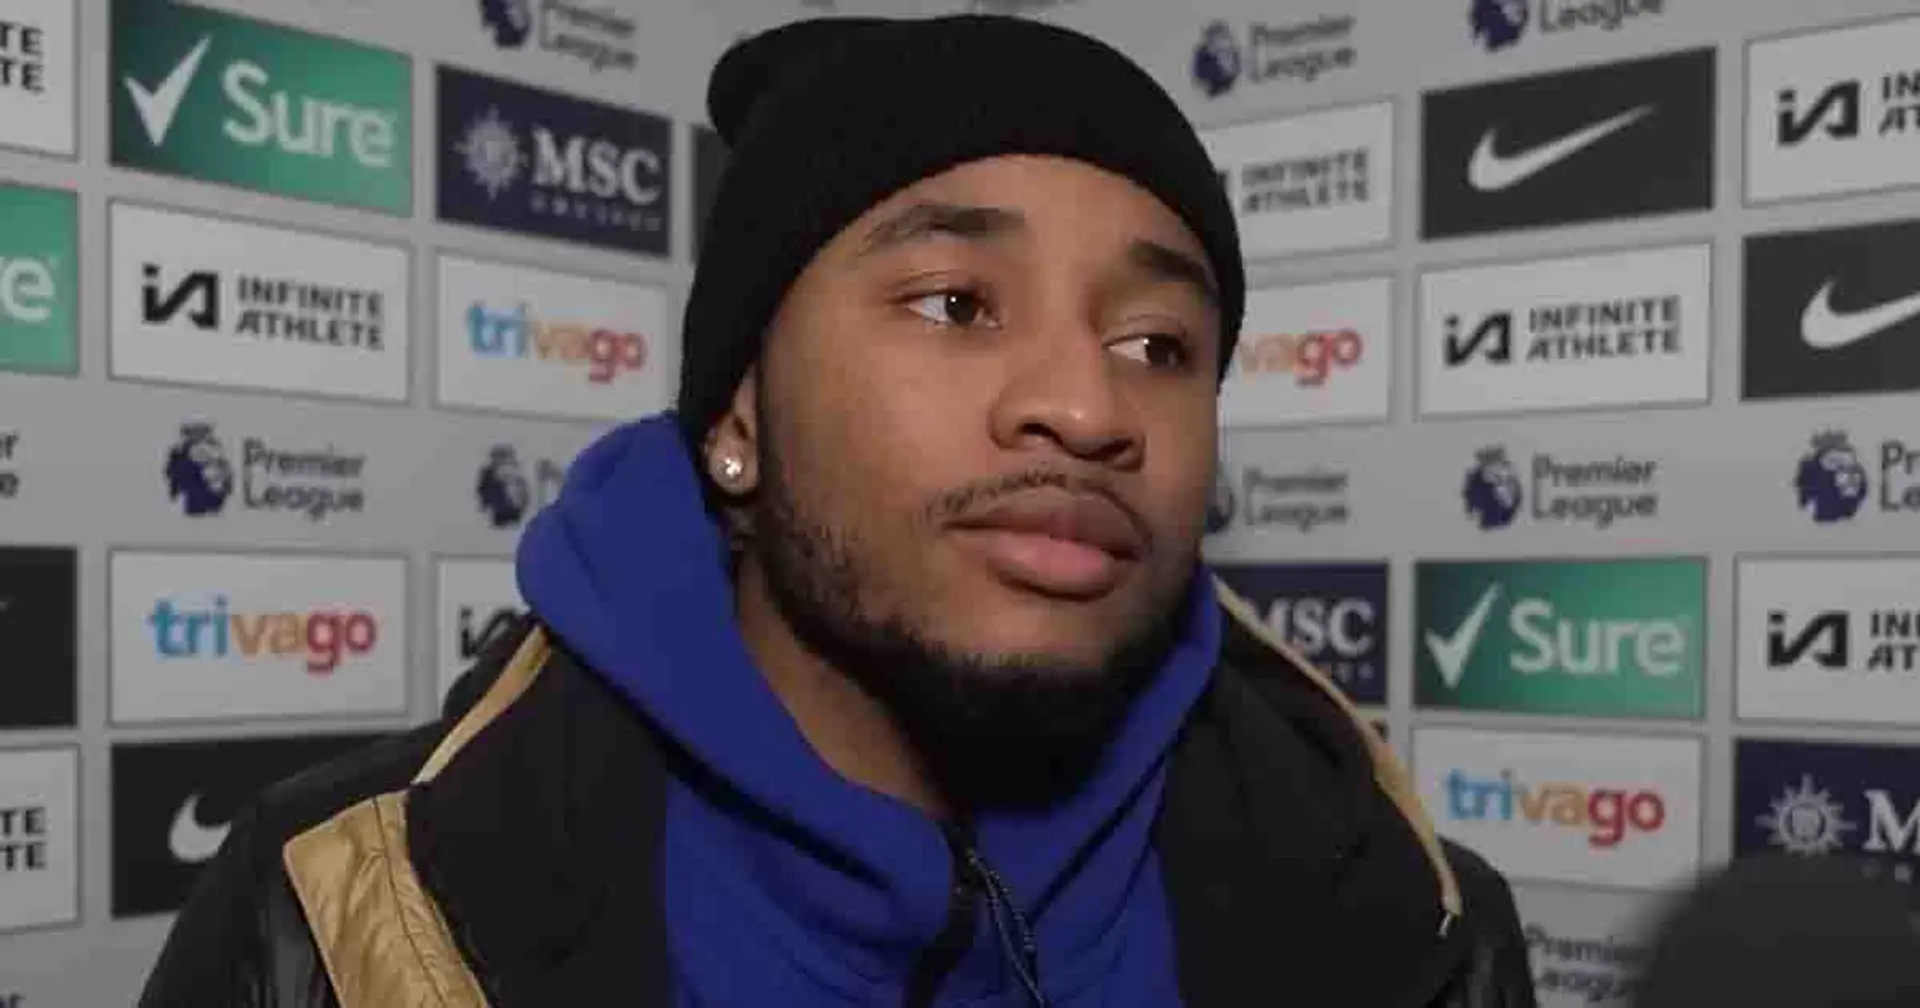 'Need to take it step by step': Nkunku details next objective after Liverpool heroics